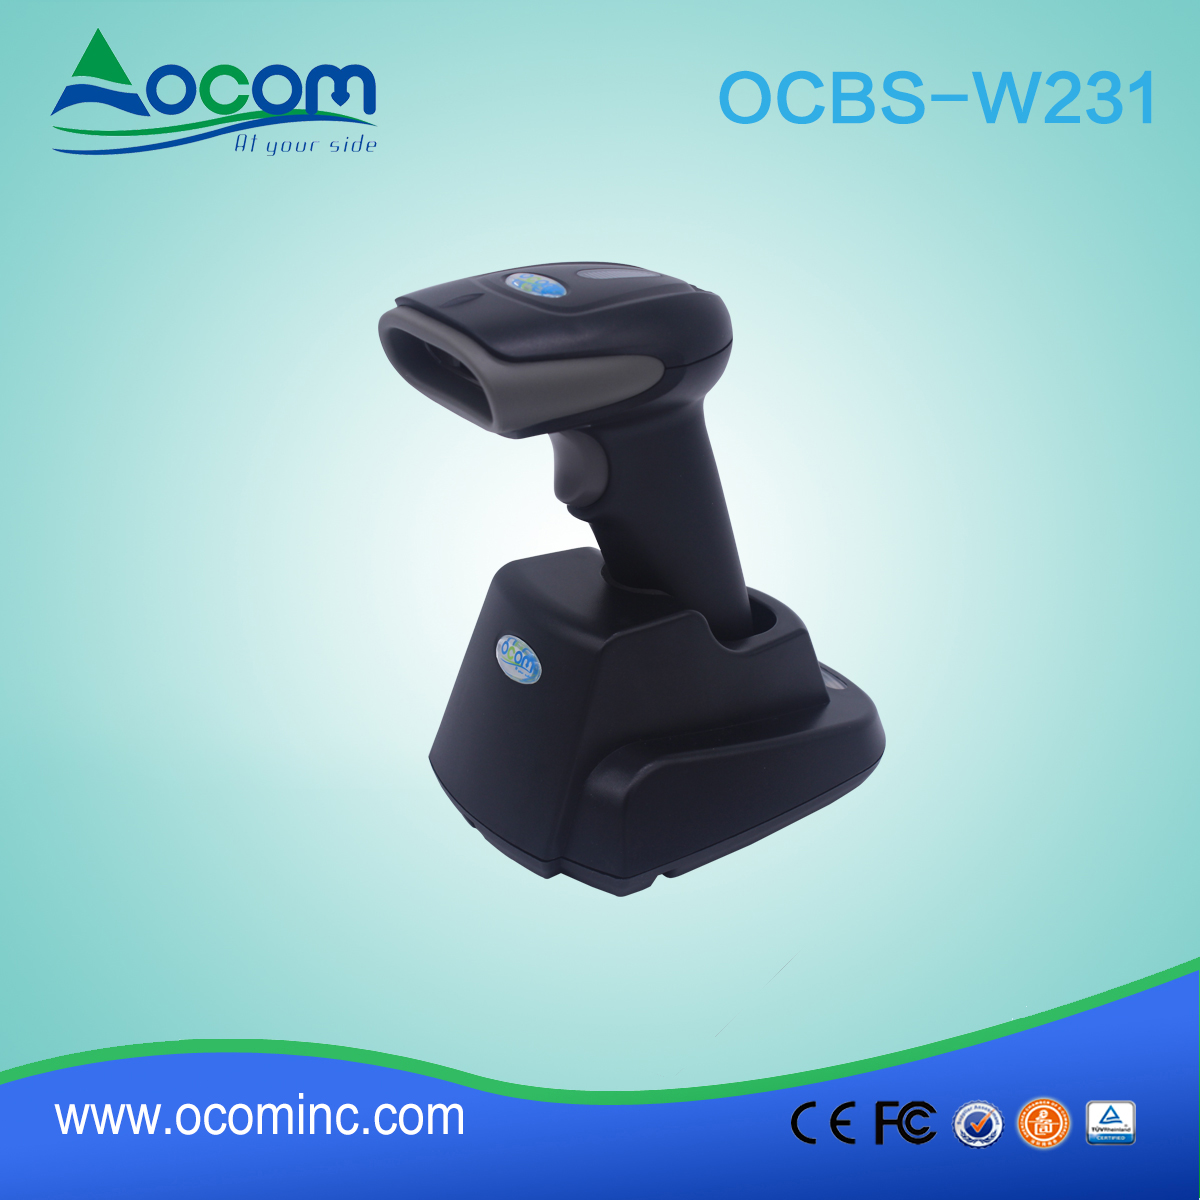 OCBS-W231 High Quality 433Mhz or Bluetooth Wireless QR Code 2D Barcode Scanner With Cradle